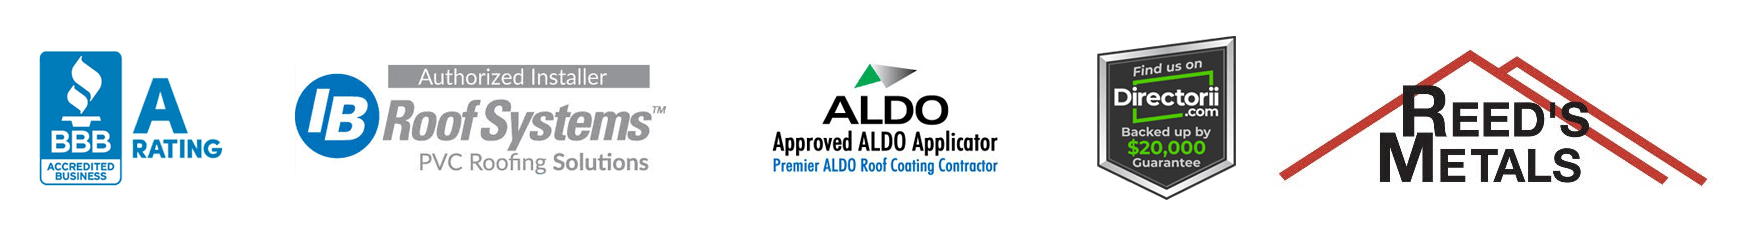 BBB A+ roofing contractor, IB Roof systems authorized installer, Aldo Coatings contractor ArkLaTex